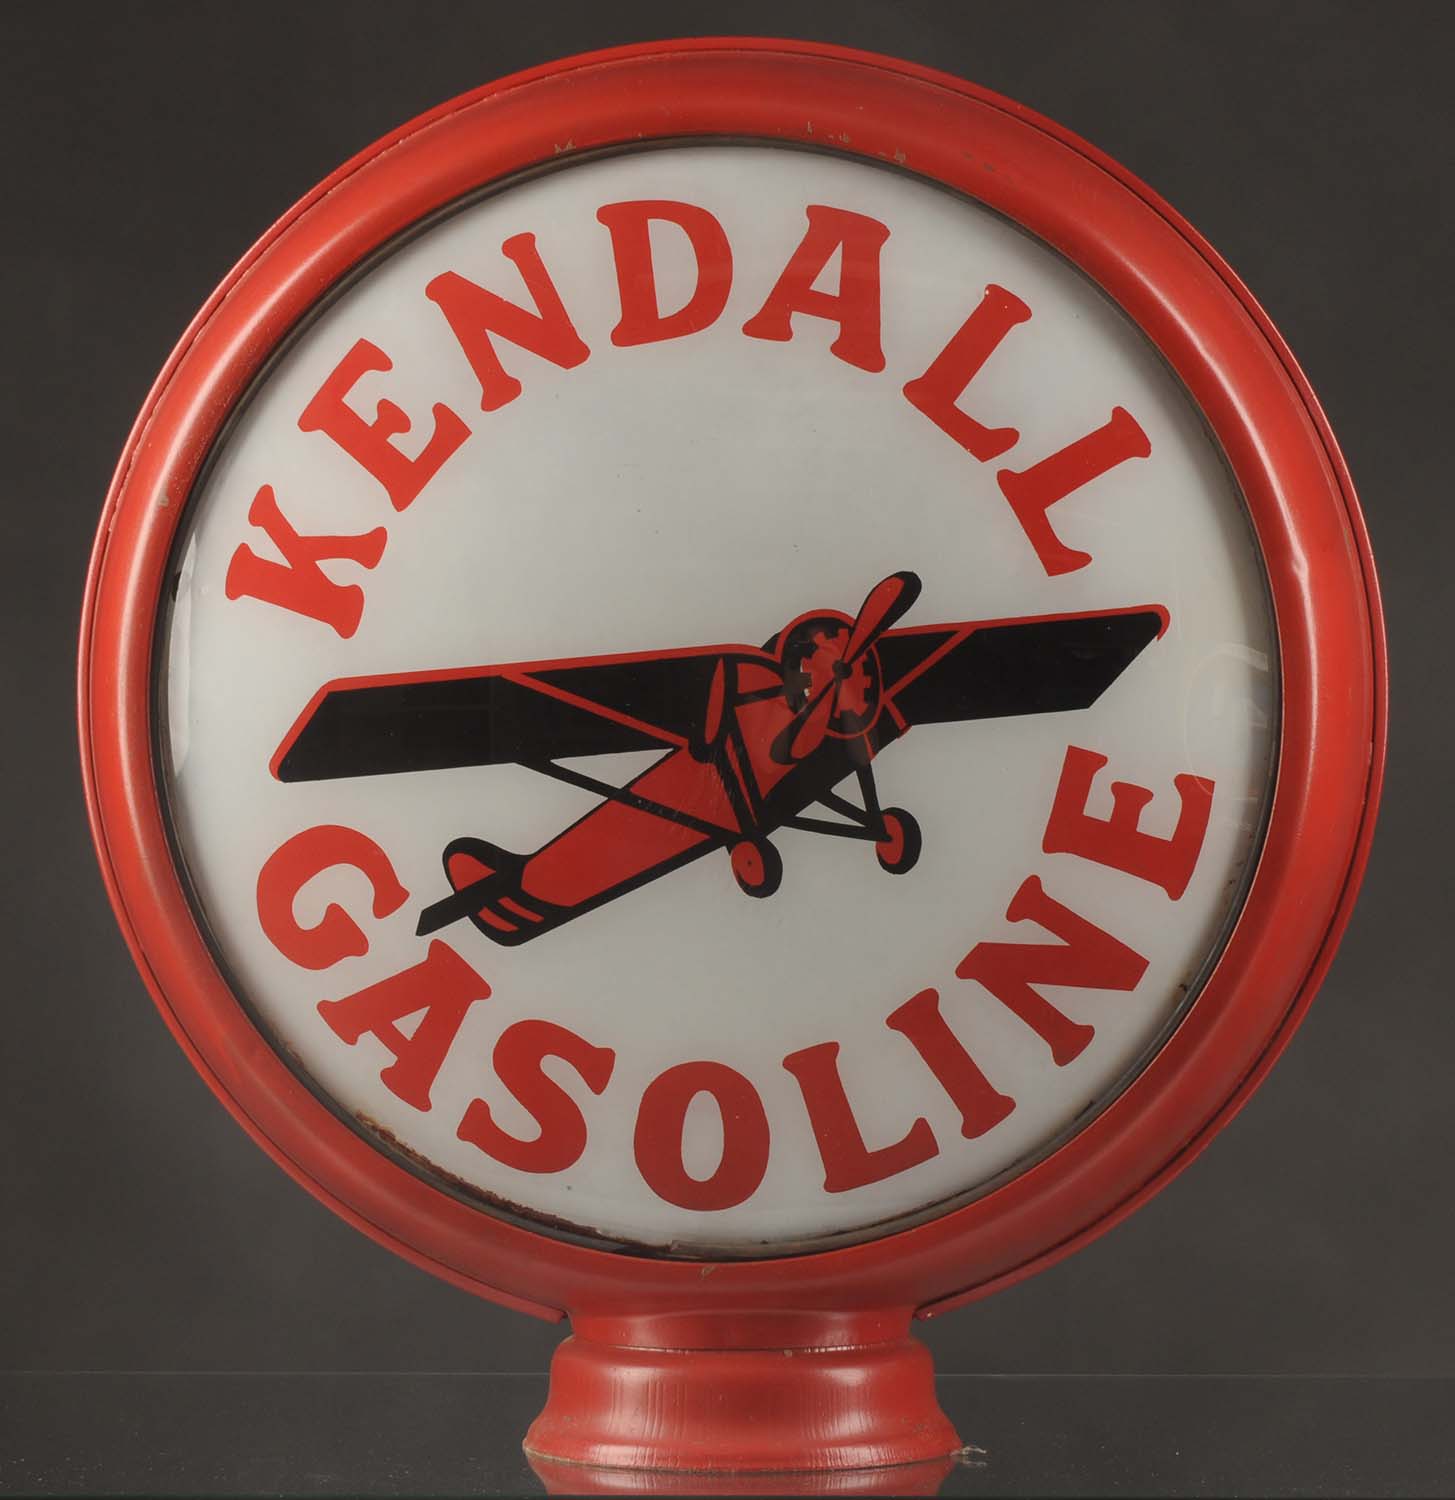 Lot #21, Kendall Gasoline Single Lens on a Metal Body, estimated at $12,000-$15,000.